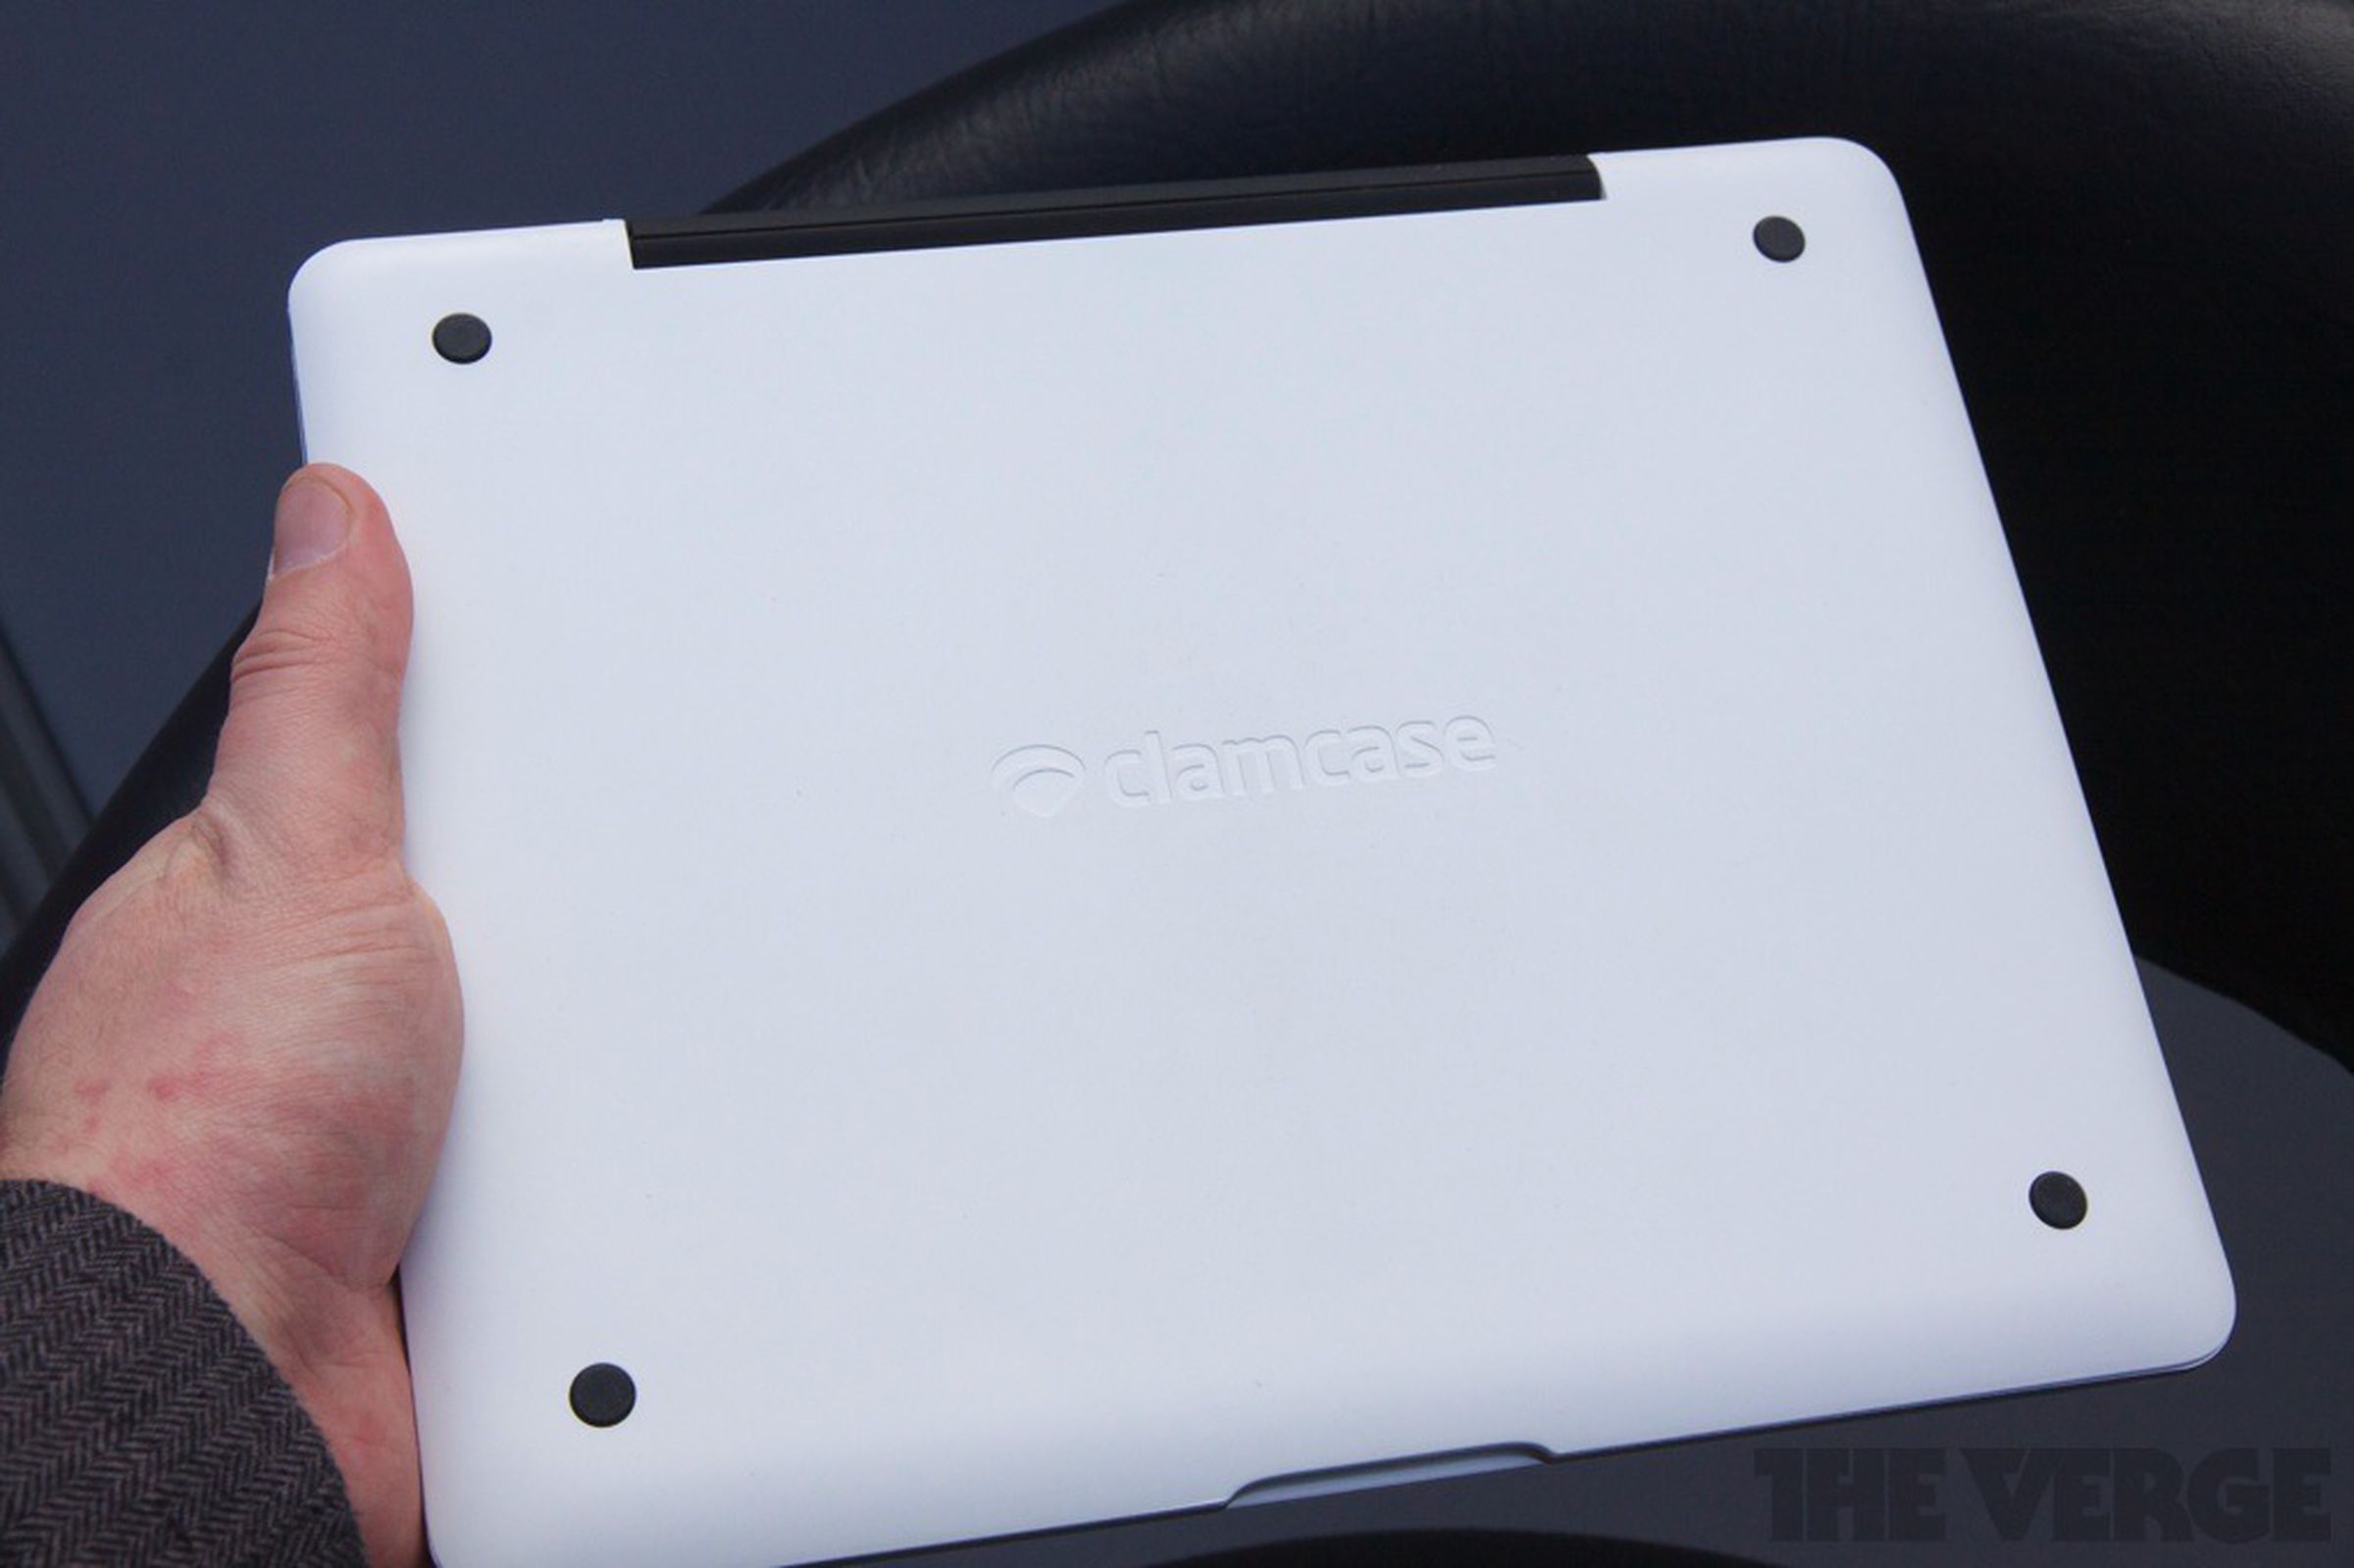 Clamcase Pro hands-on photos